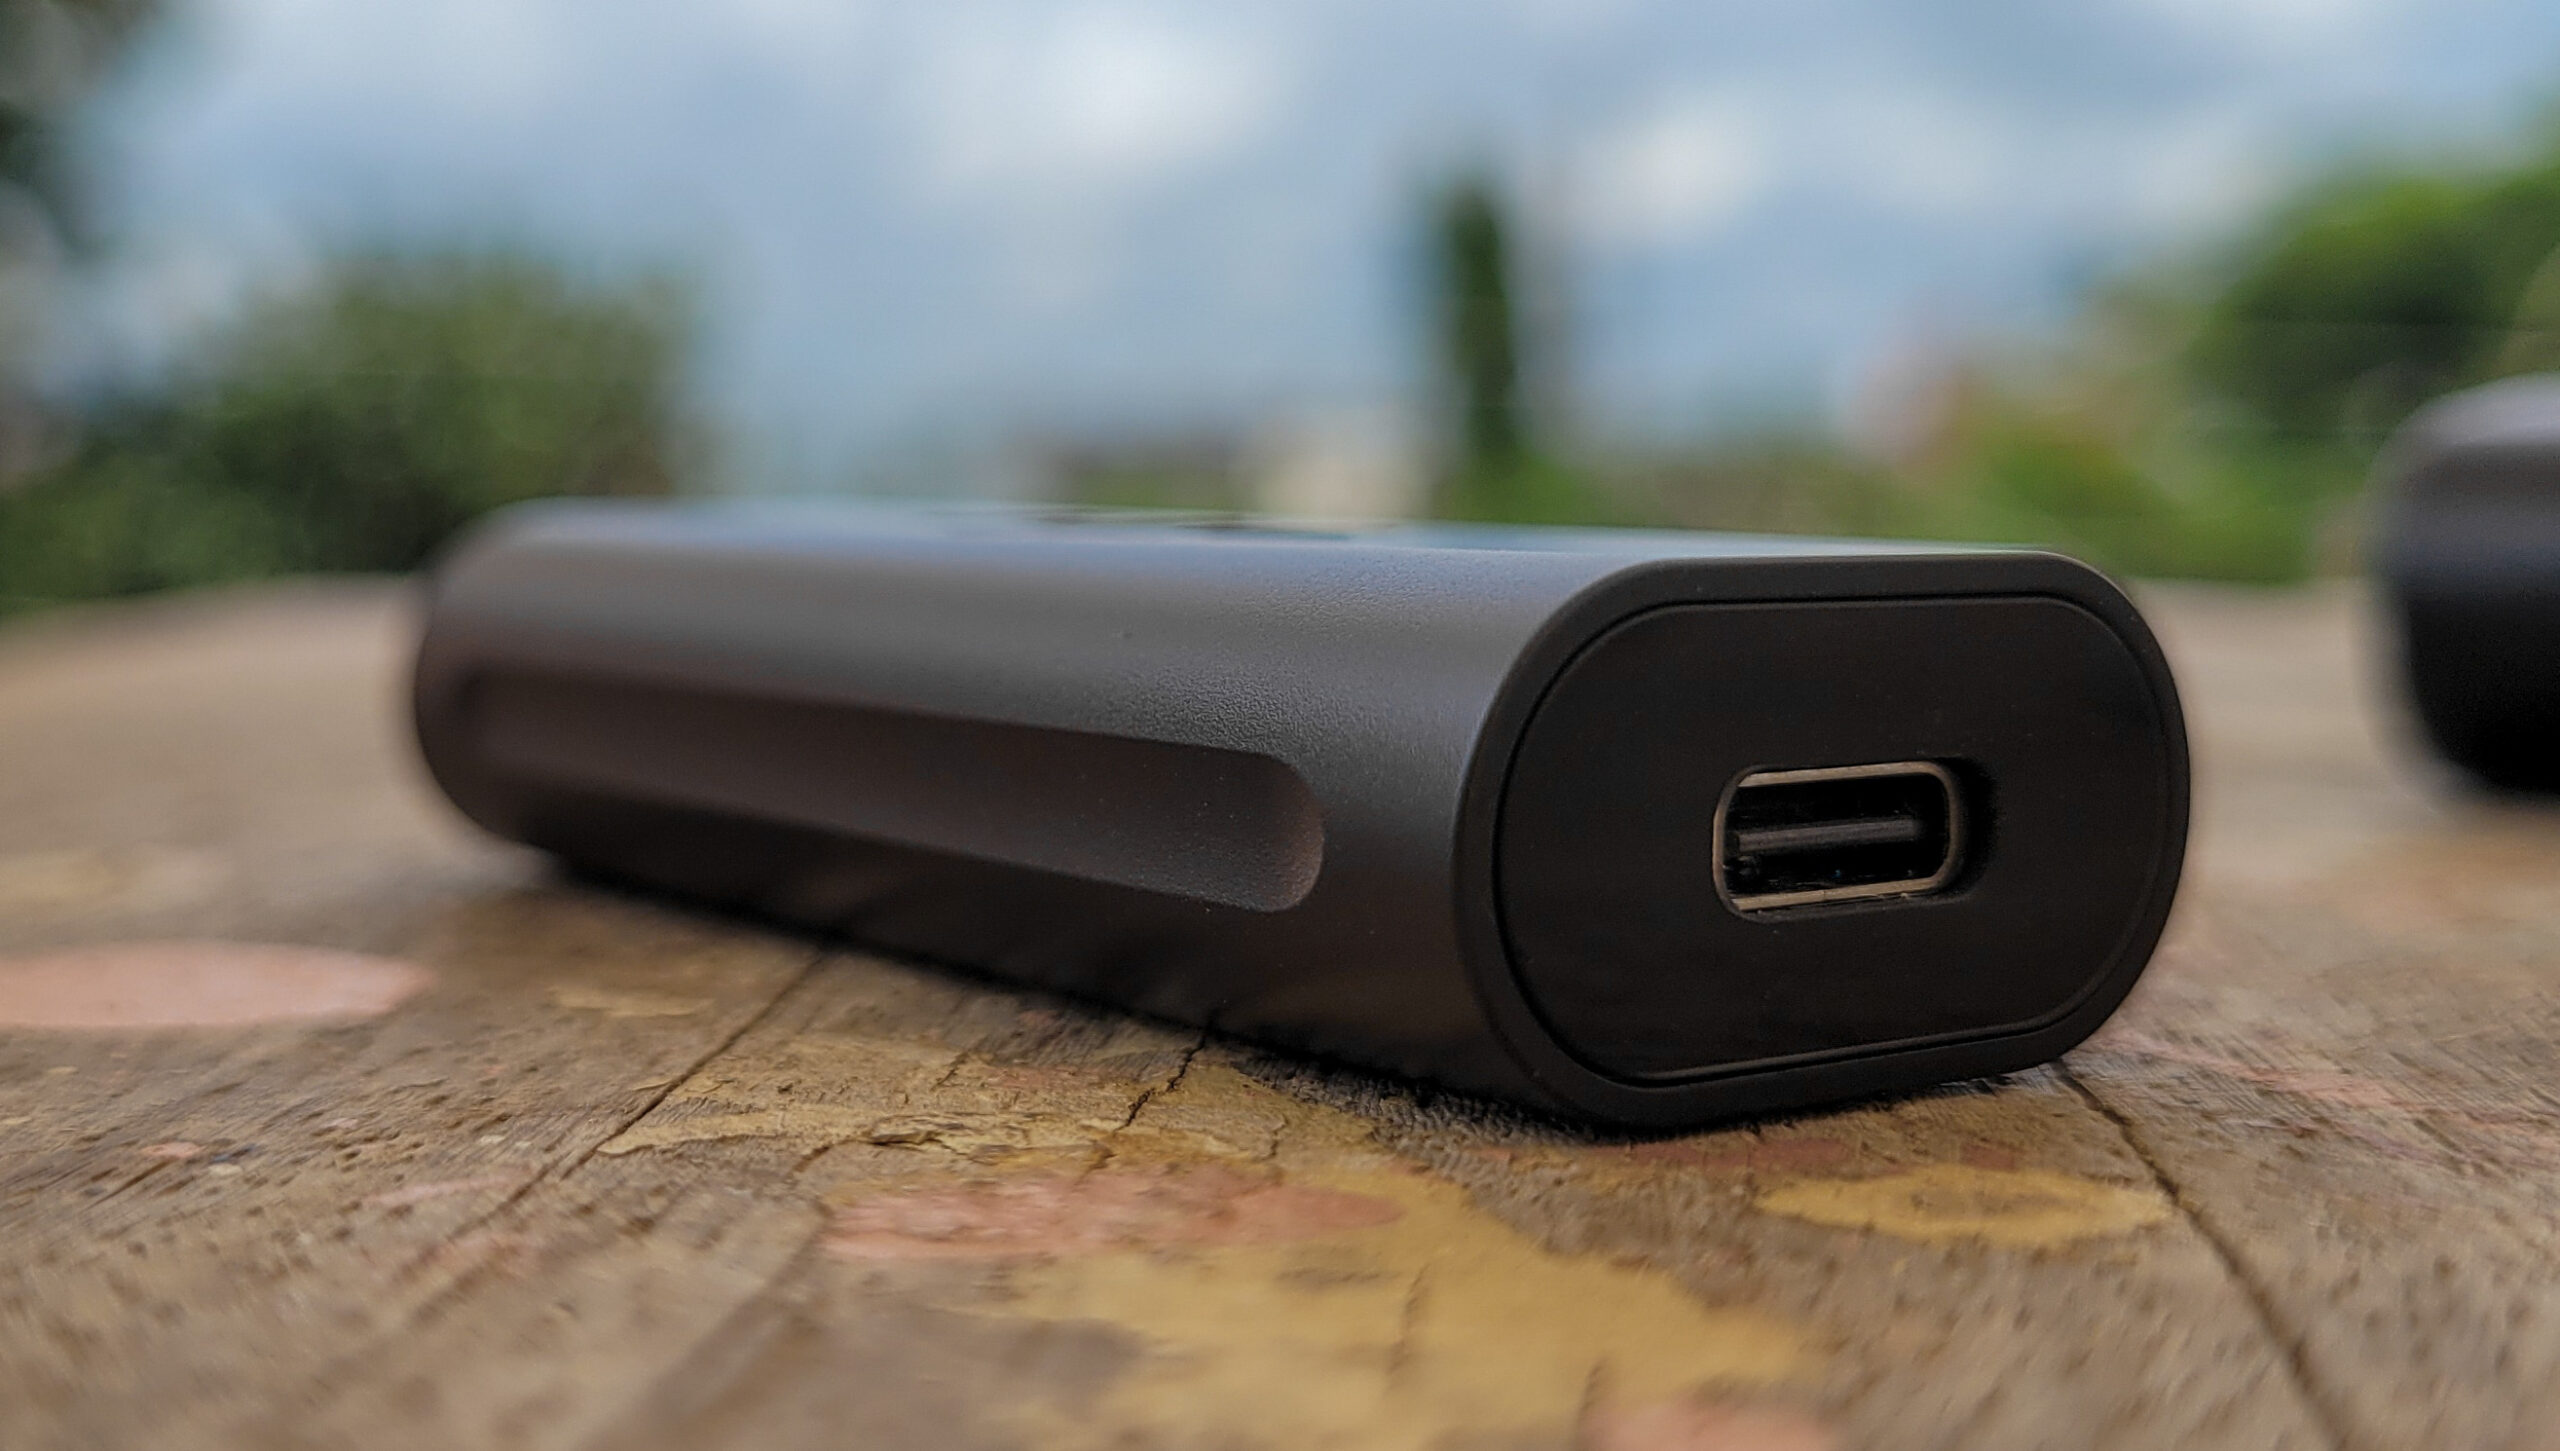 Shanling UA3 review : The Best Budget Dongle